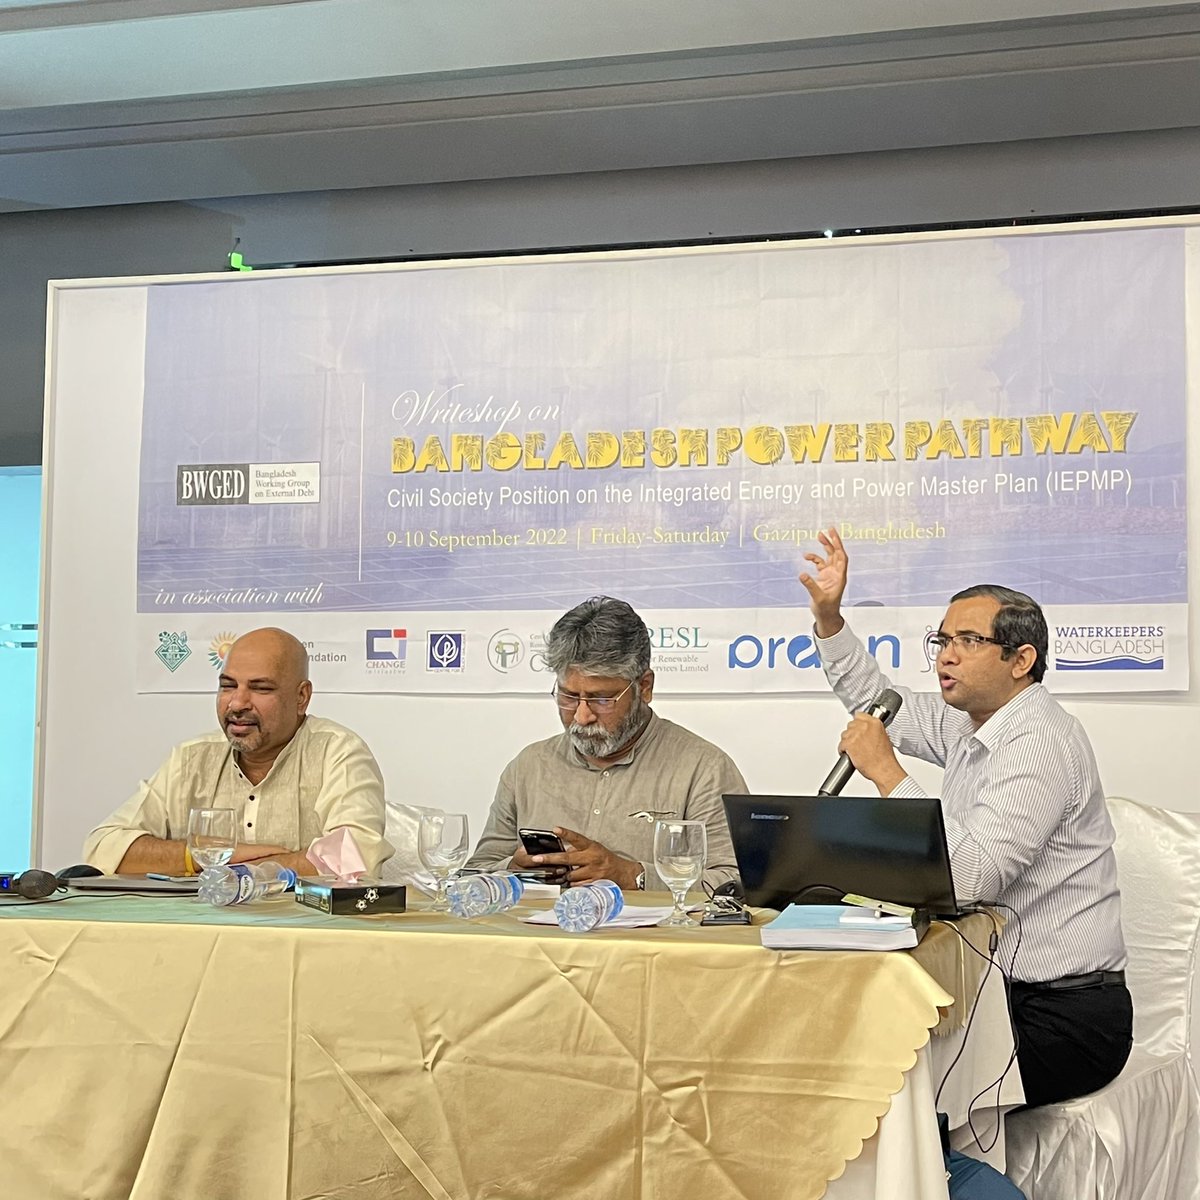 Writeshop on #Bangladesh_Power_Pathway
CSO Positiion on the Integrated Energy & Power Master Plan #IEPMP by @bwged_bd in association with @CLEANBD @cpdbd @praanbd @riverine_people @WaterkeepersBD